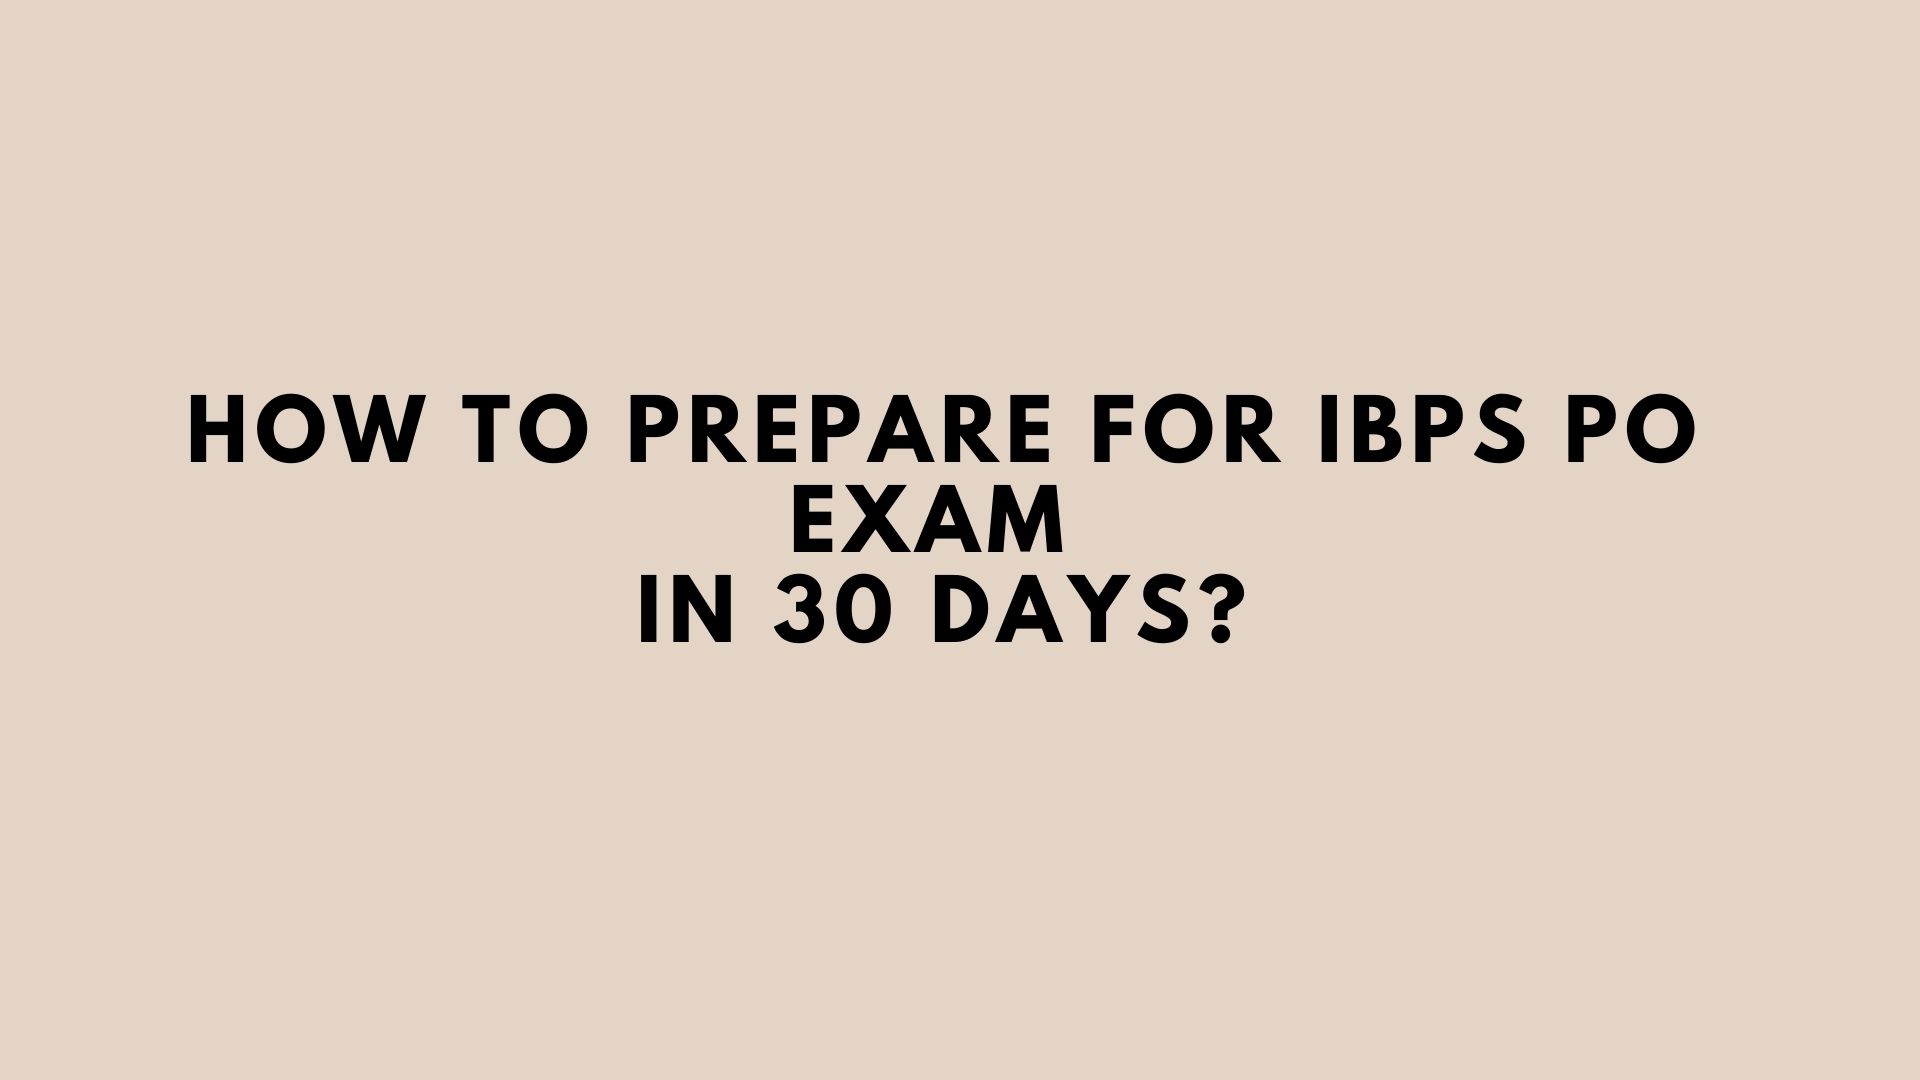 How to Prepare for IBPS PO Exam in 30 days